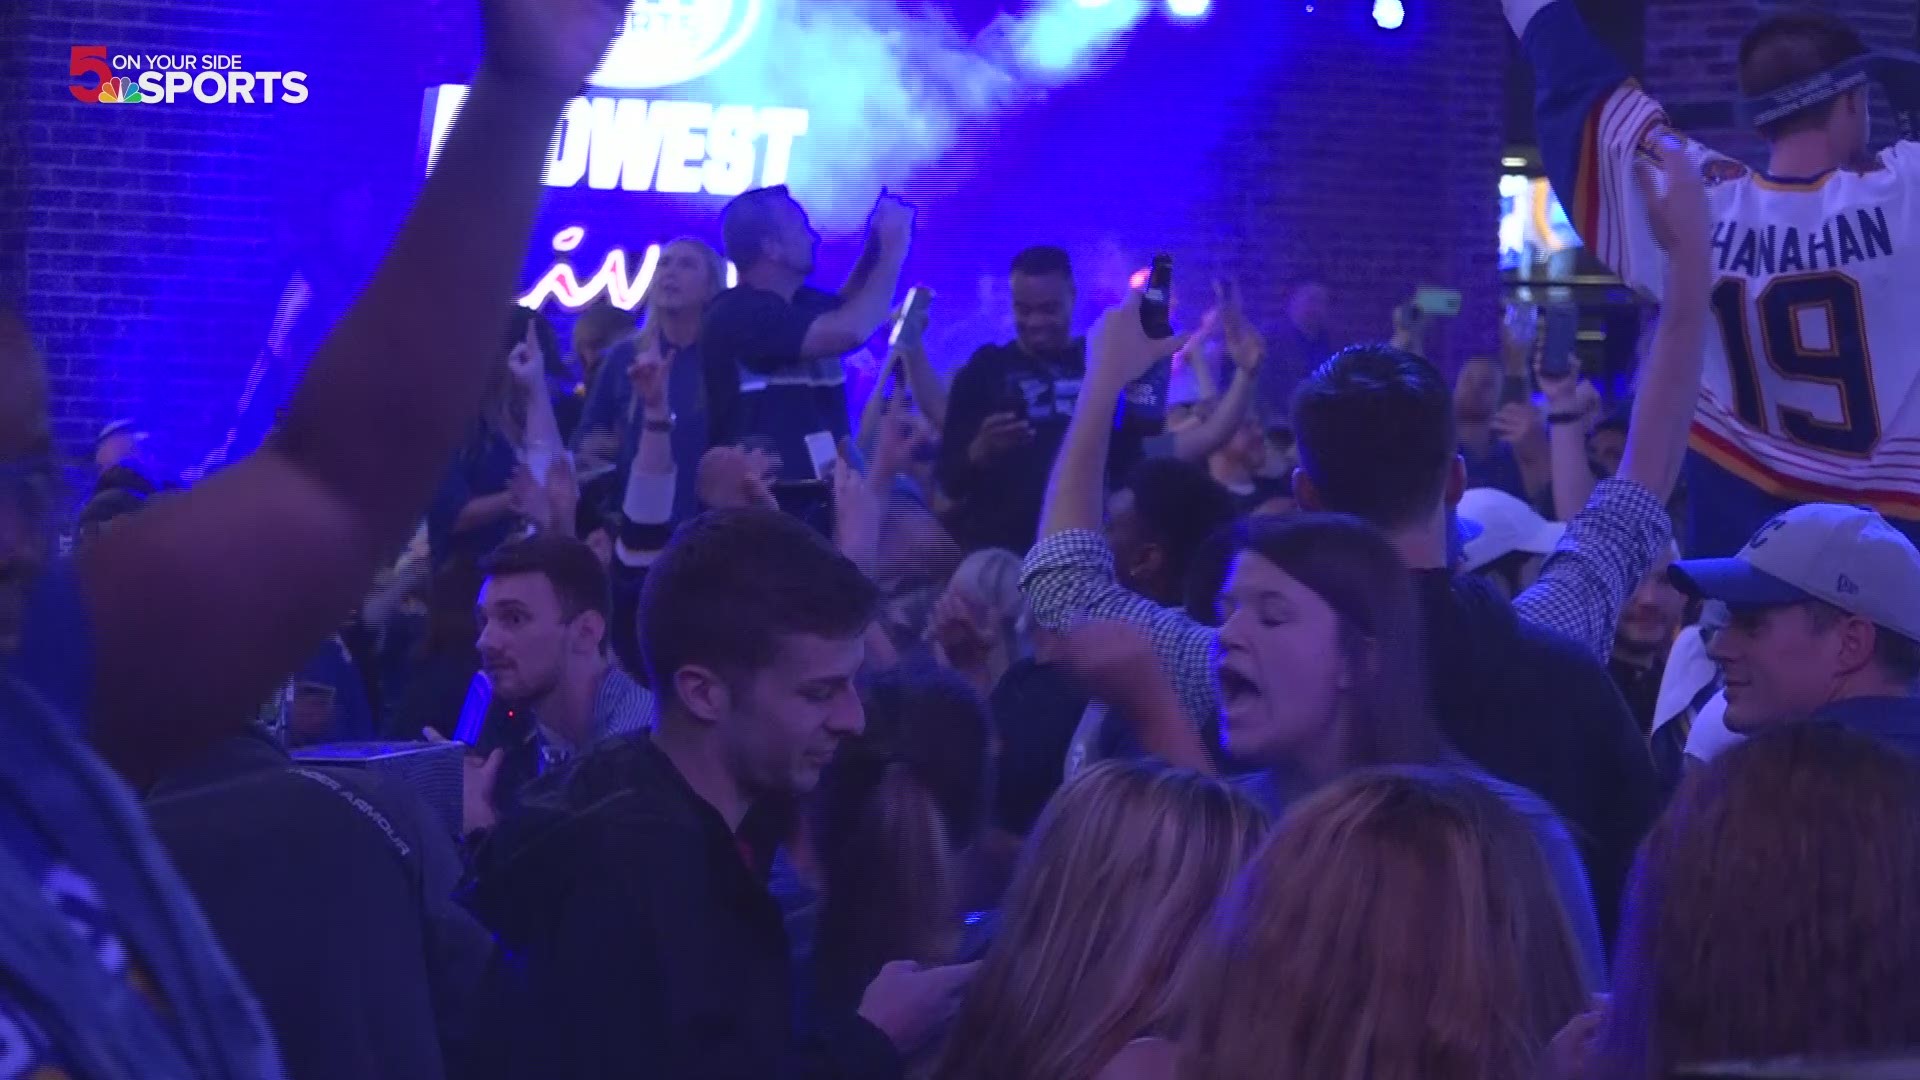 Ballpark Village in downtown St. Louis was packed Tuesday night for Game 6 of the Blues-Sharks playoff series. The venue went crazy when the Blues won, and--of course--everyone sang the Blues' anthem 'Gloria' when the Note won.